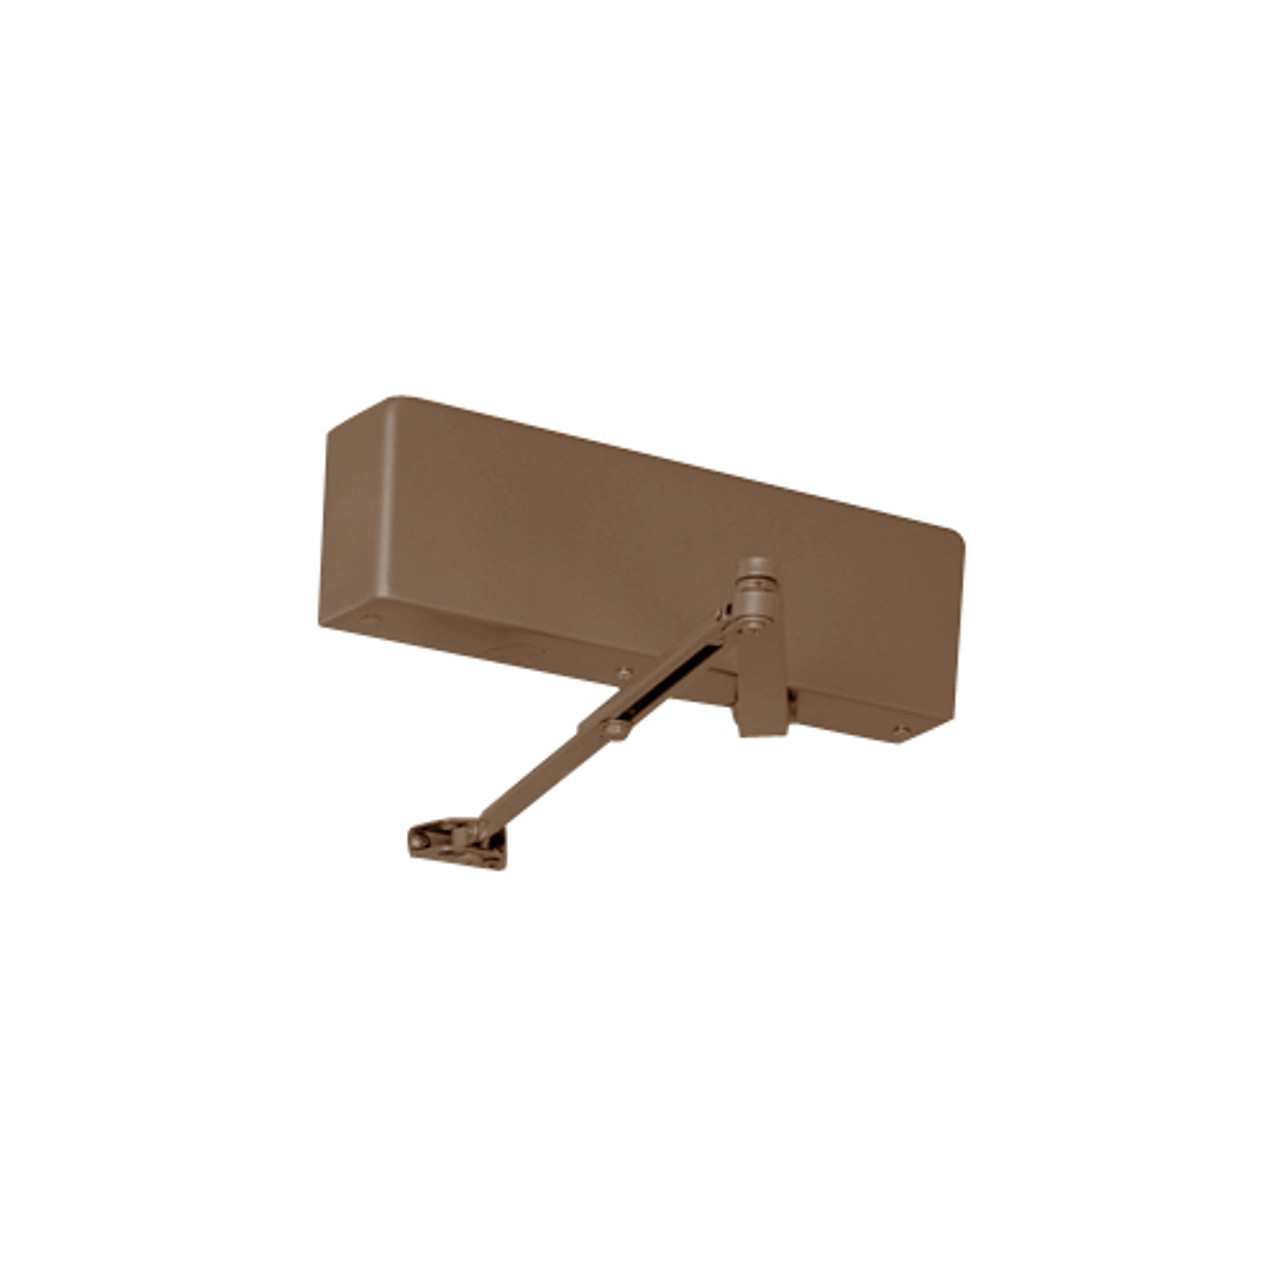 J7500HDA-691 Norton 7500 Series Hold Open Institutional Door Closer with Top Jamb Only Reveals 2-3/4 to 6-3/4 inch to 150 Degree in Dull Bronze Finish